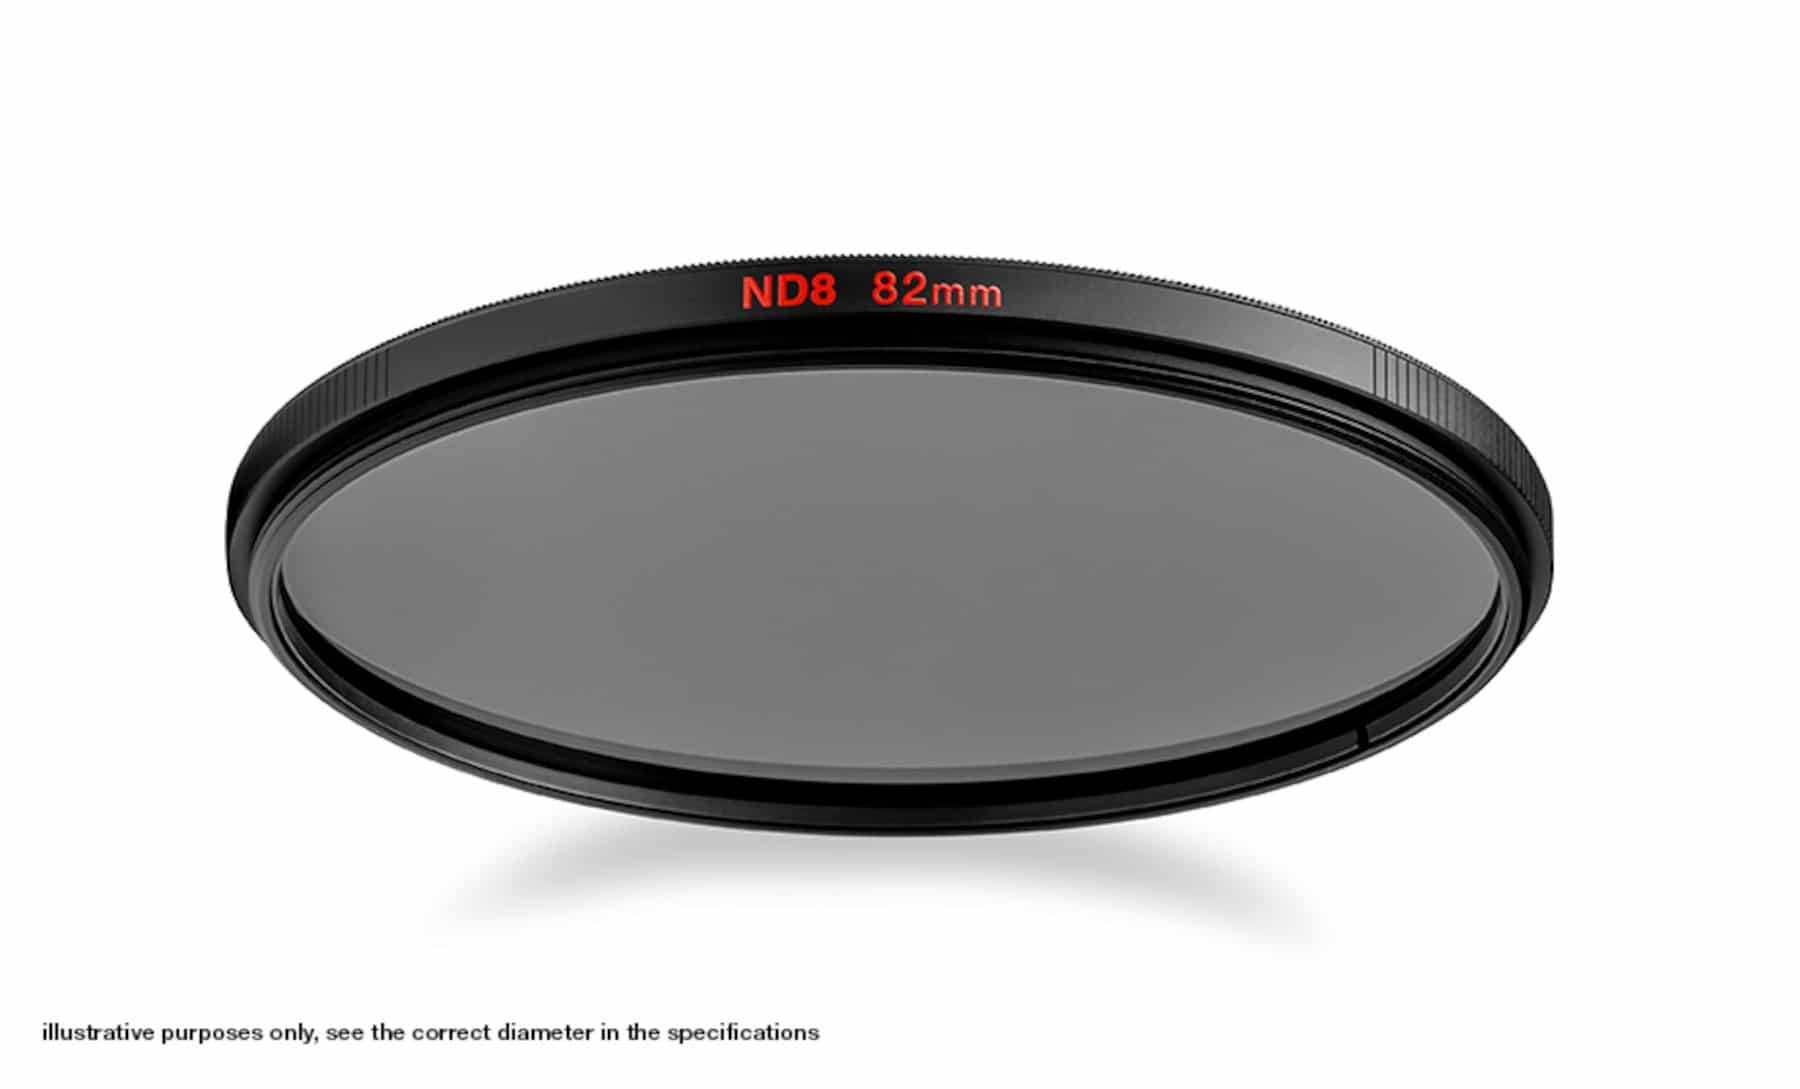 Manfrotto Neutral Density 8 Filter with 77mm diameter.